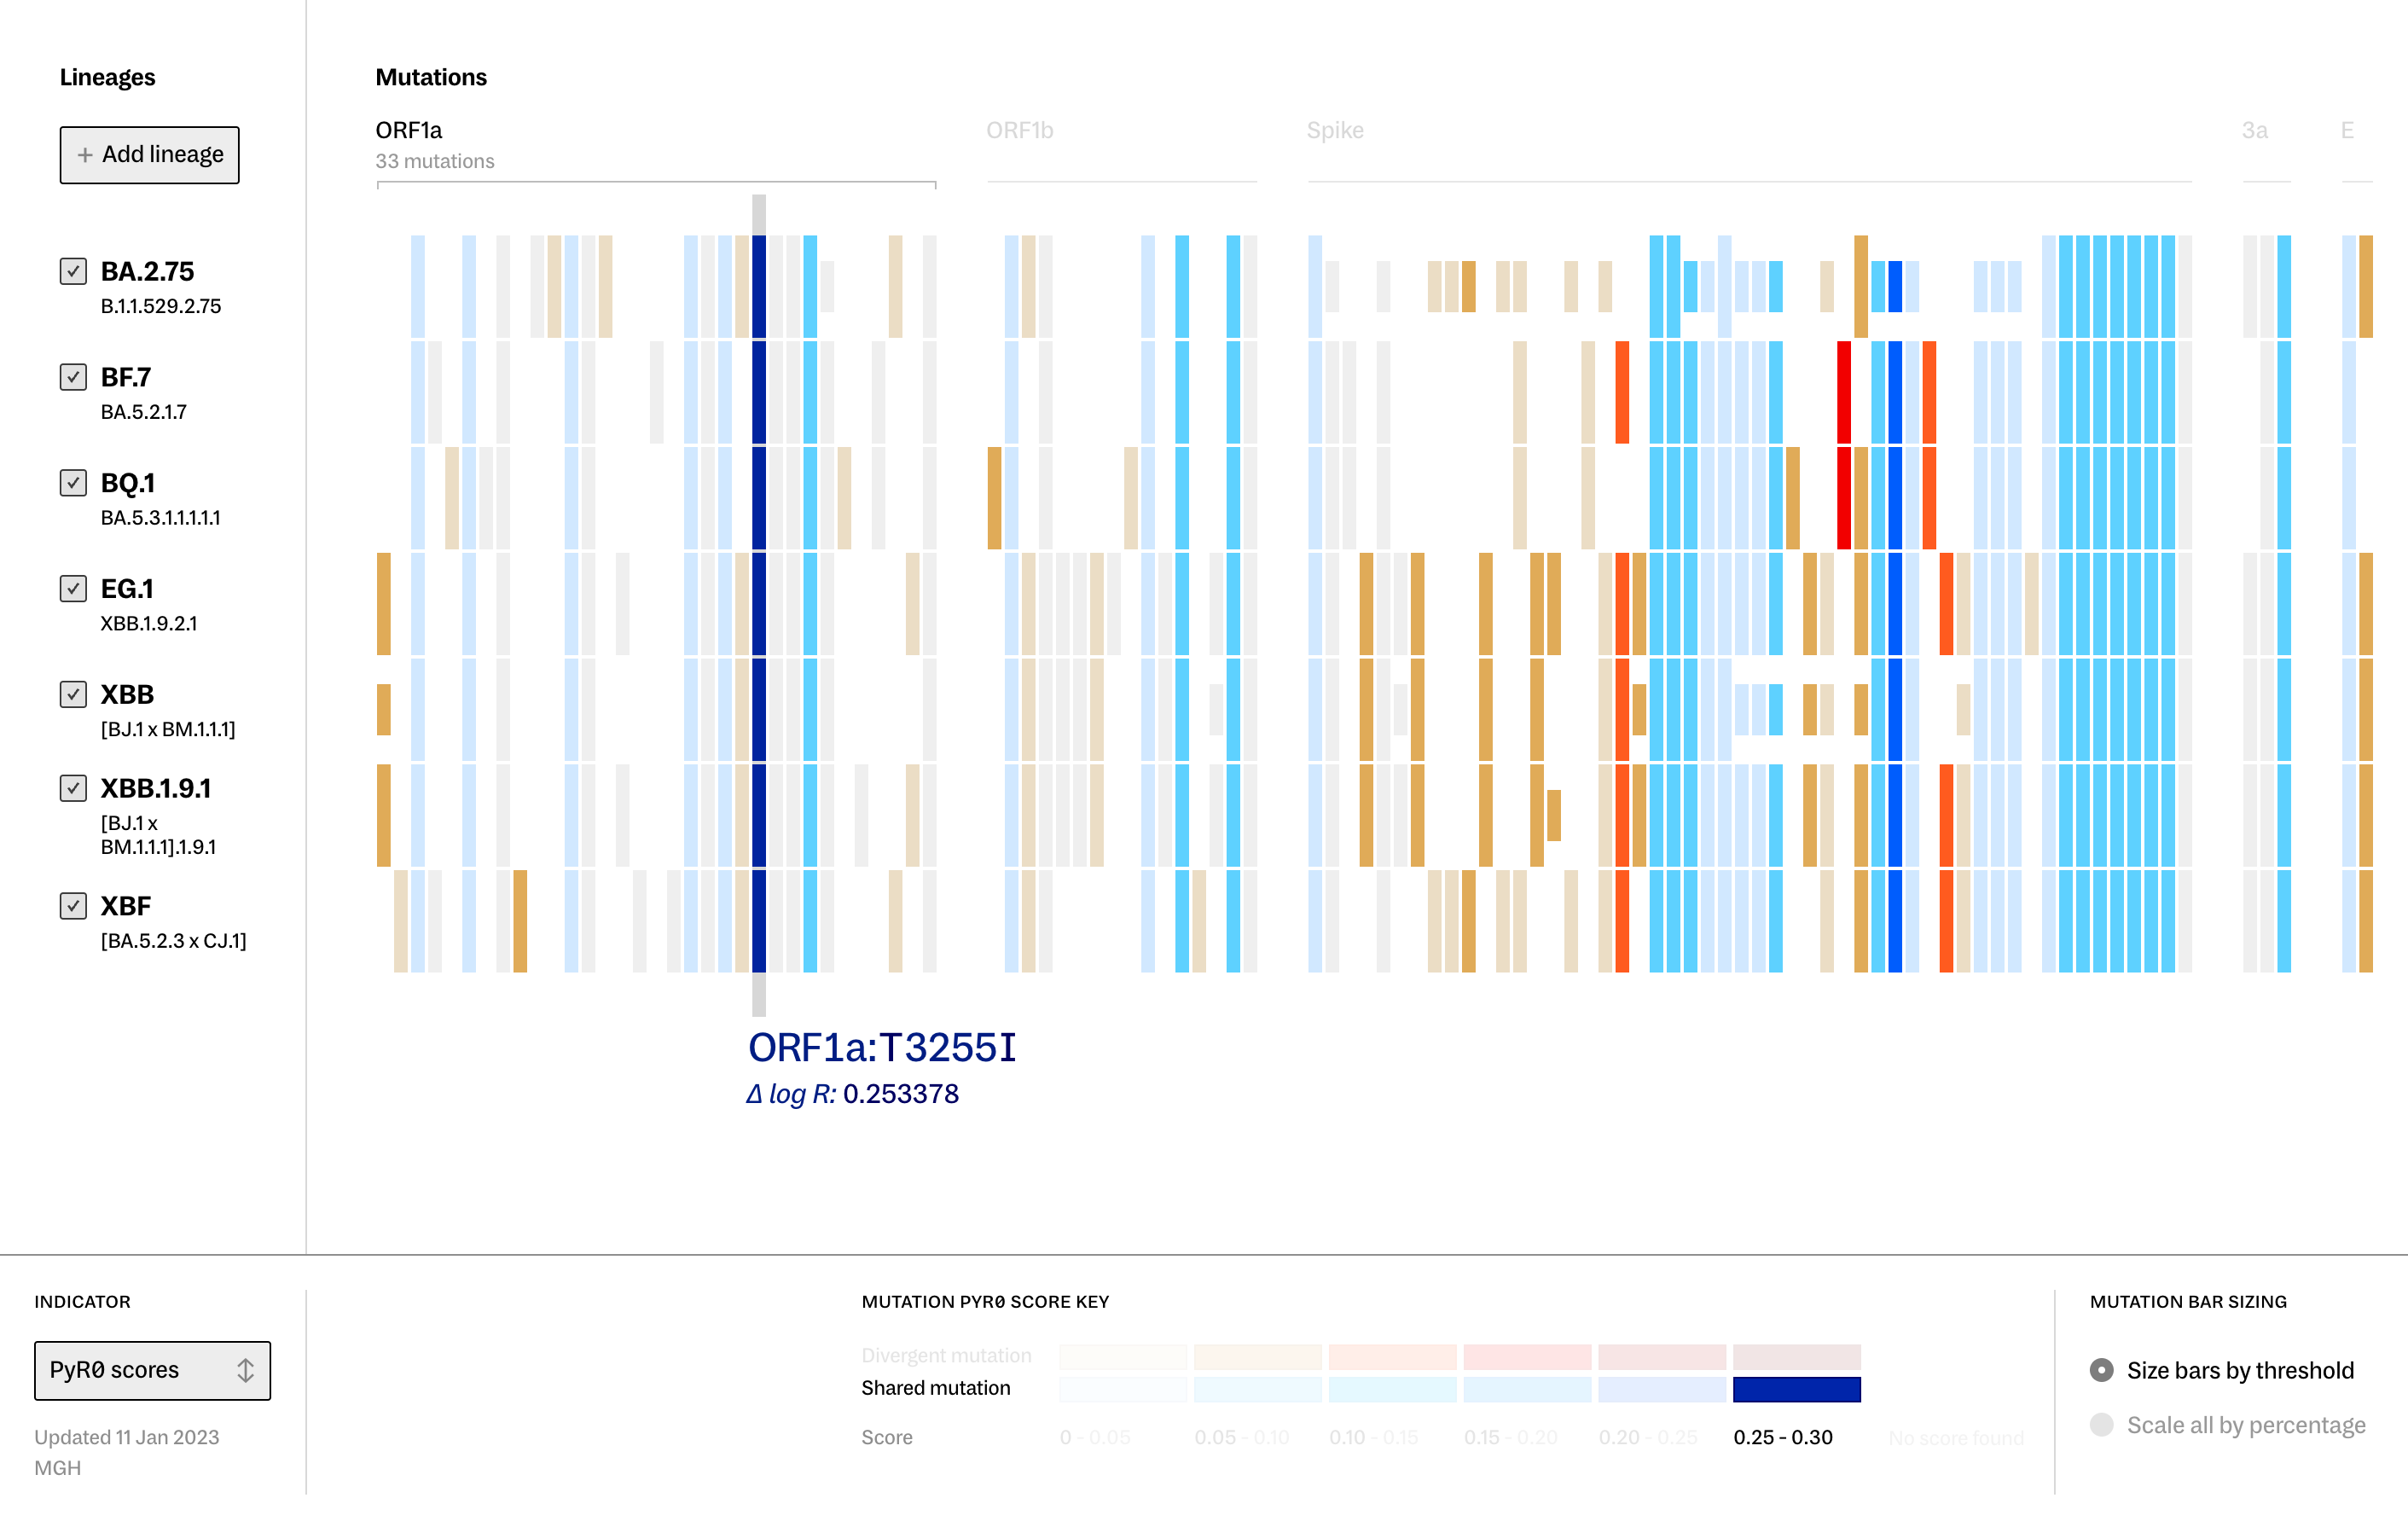 The Lineage Portraits tool, which shows a graphic representation of how similar or unique the top COVID lineages are, each with a row of colored bars representing the mutations in that lineage.